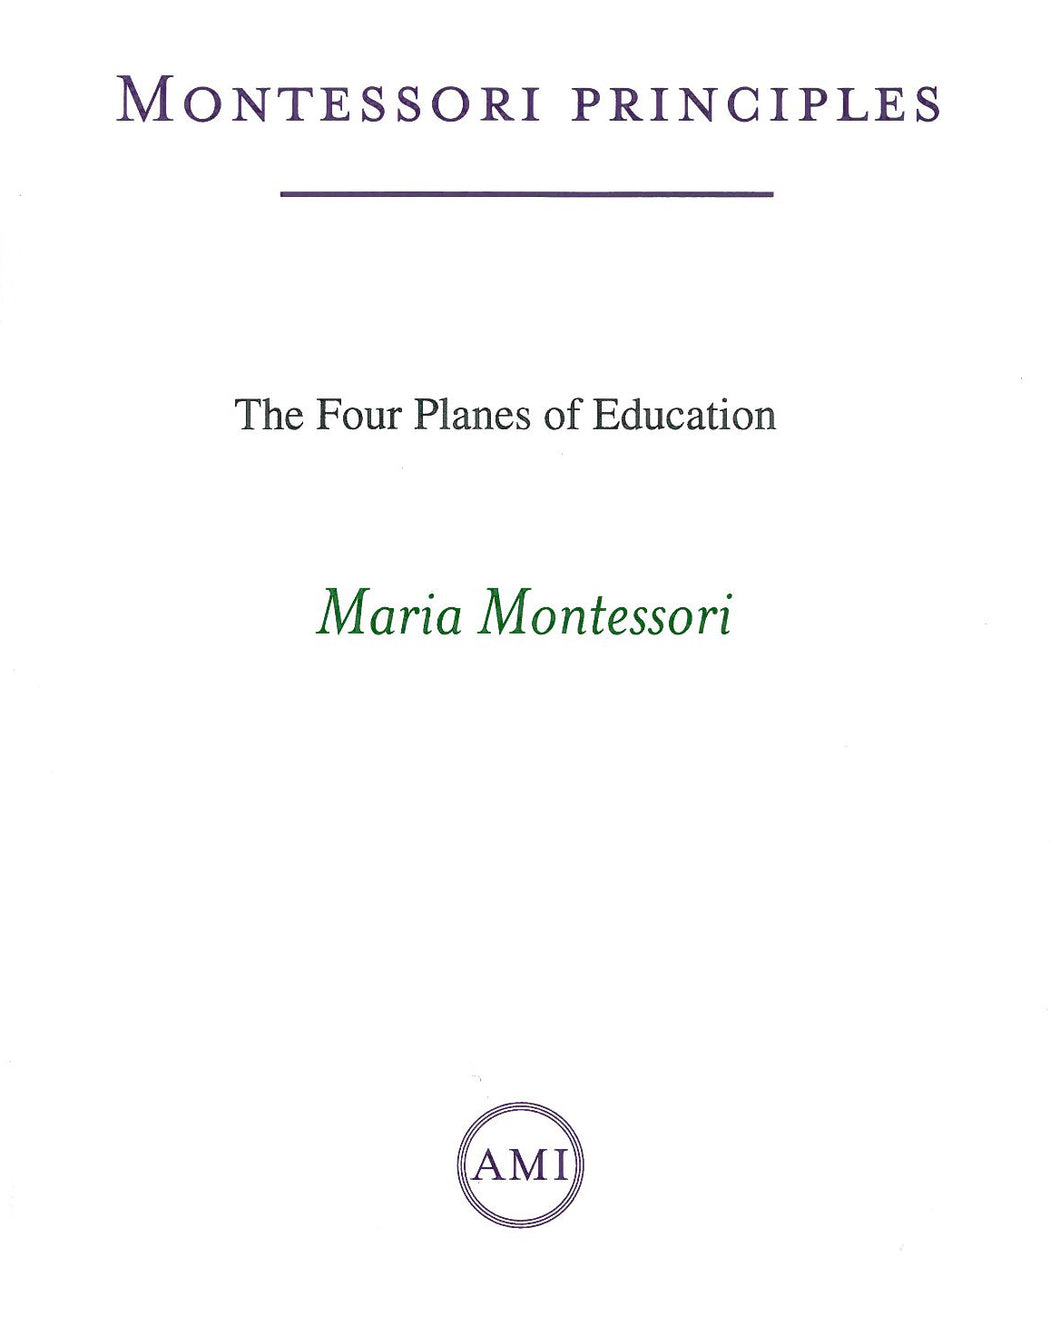 Four Planes of Education